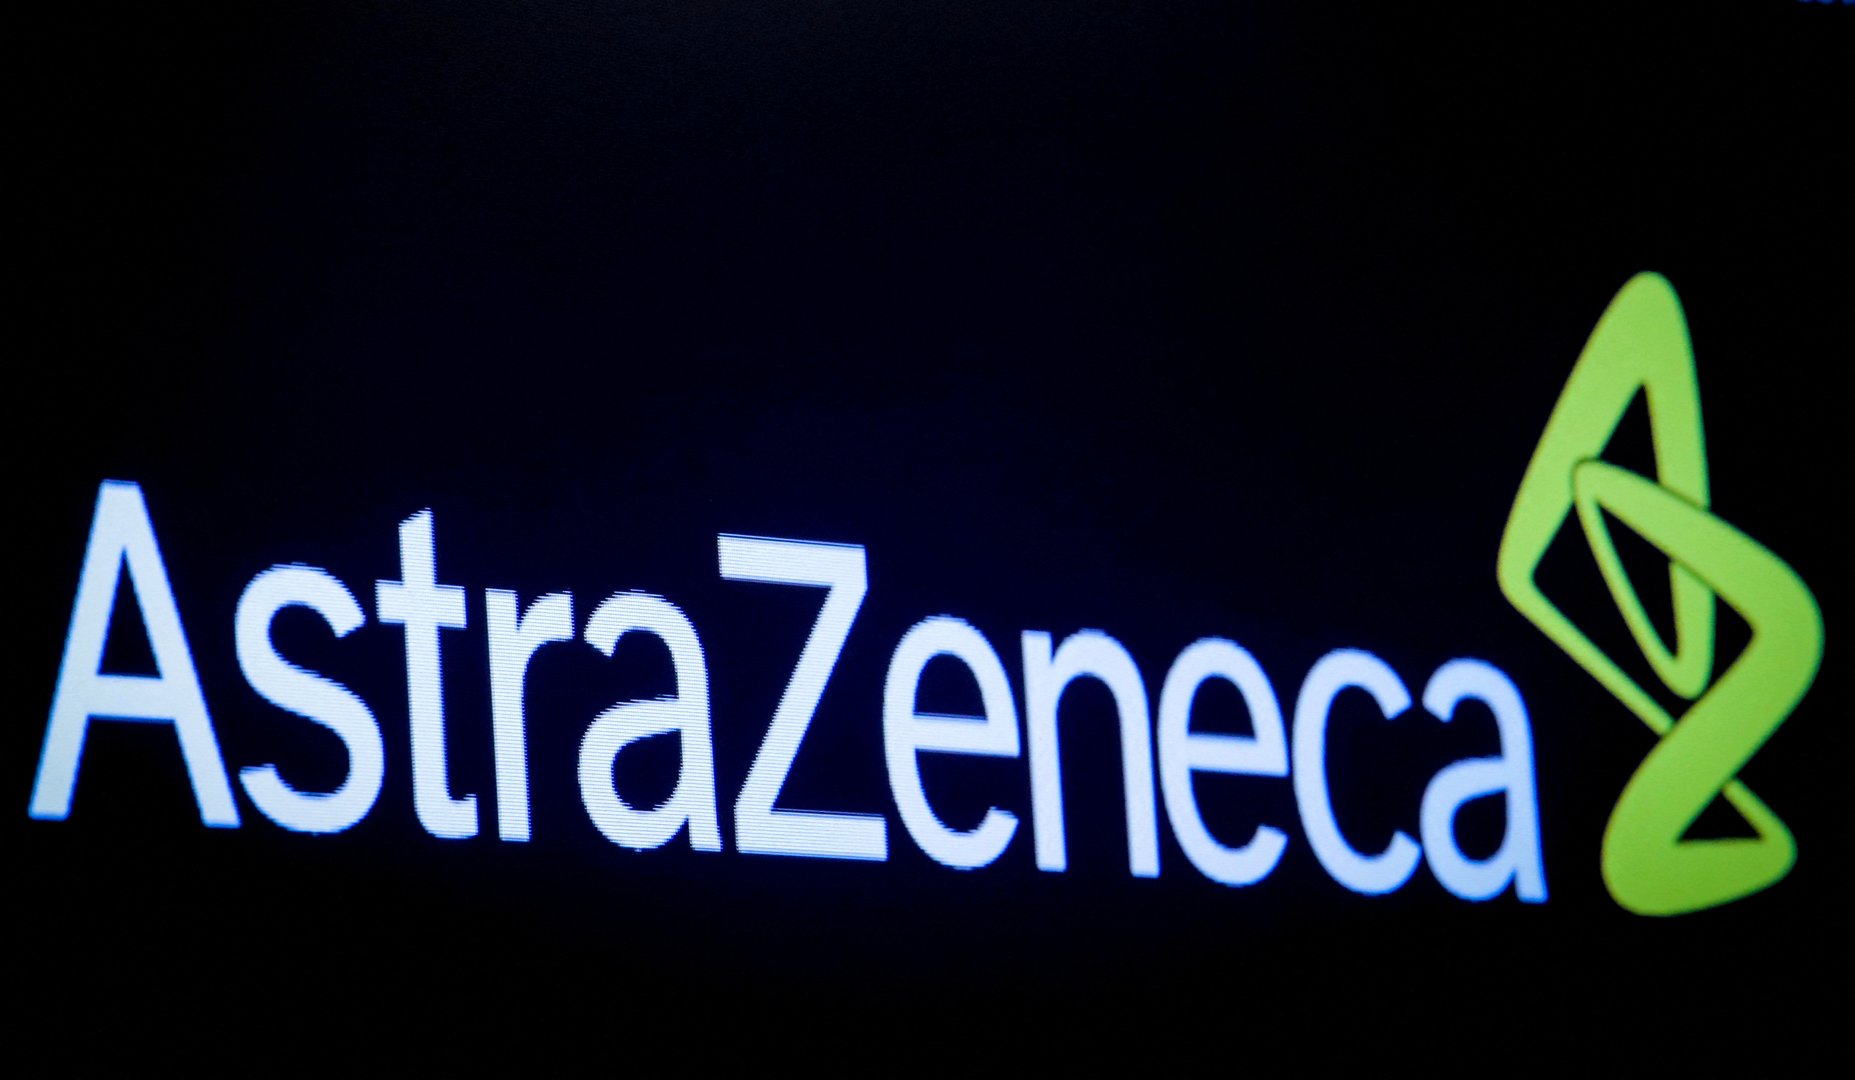 image AstraZeneca gets EU backing for targeted breast cancer therapies